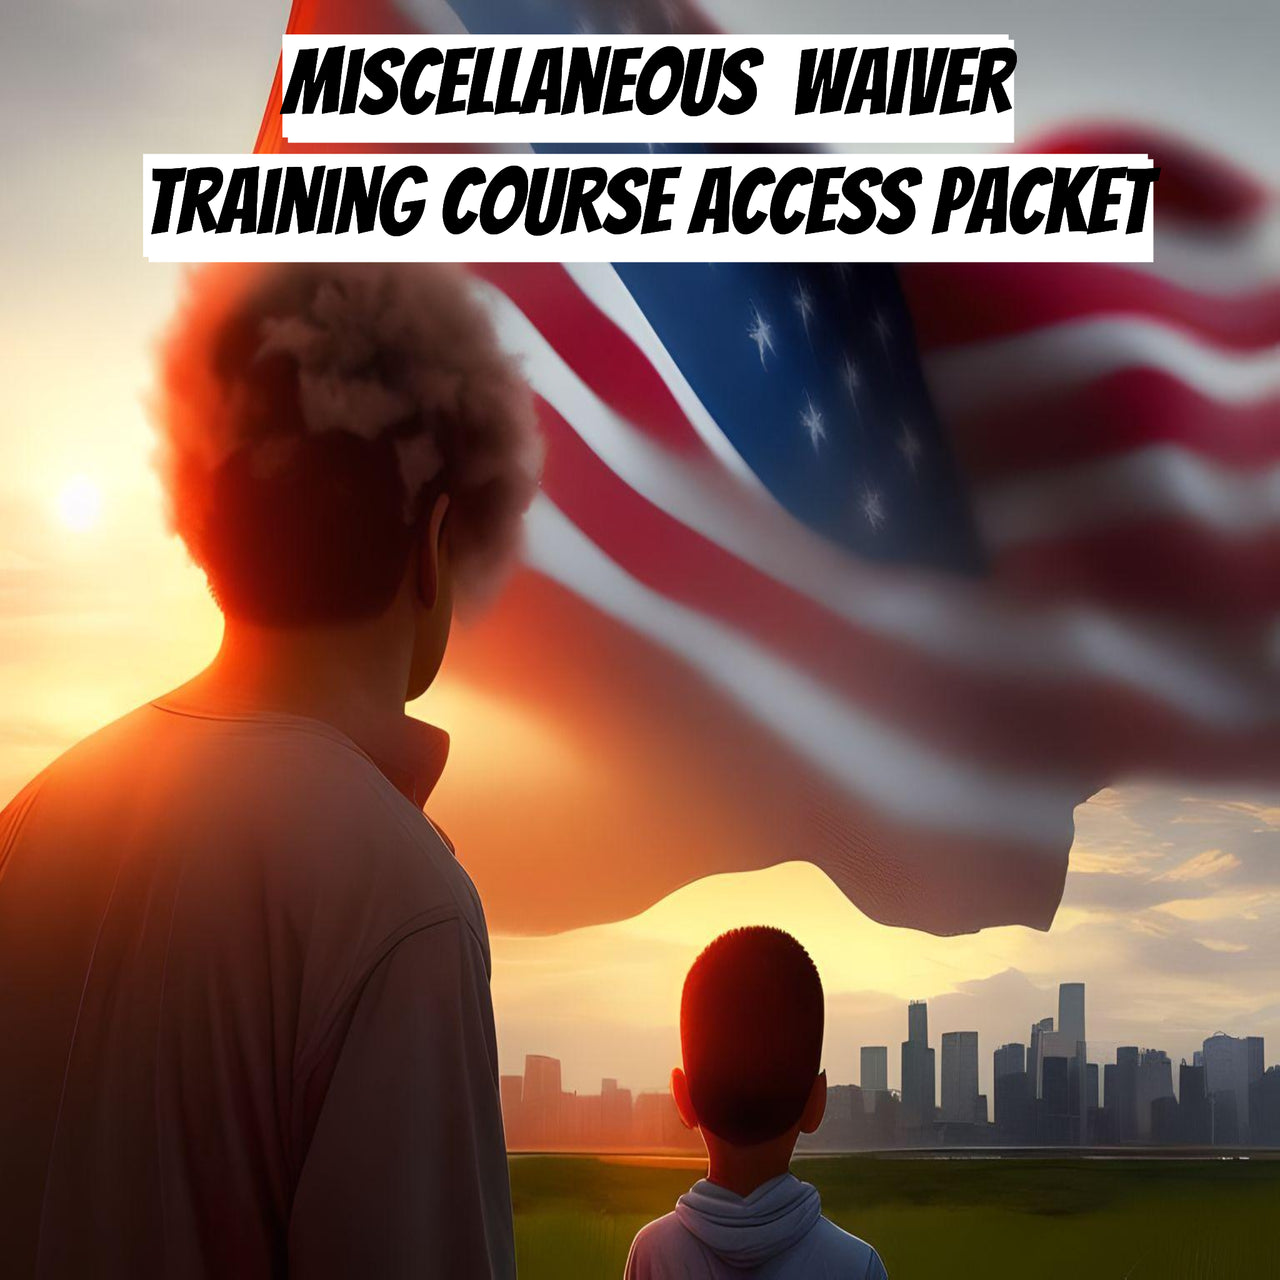 Miscellaneous Waivers Training Course Access Packet